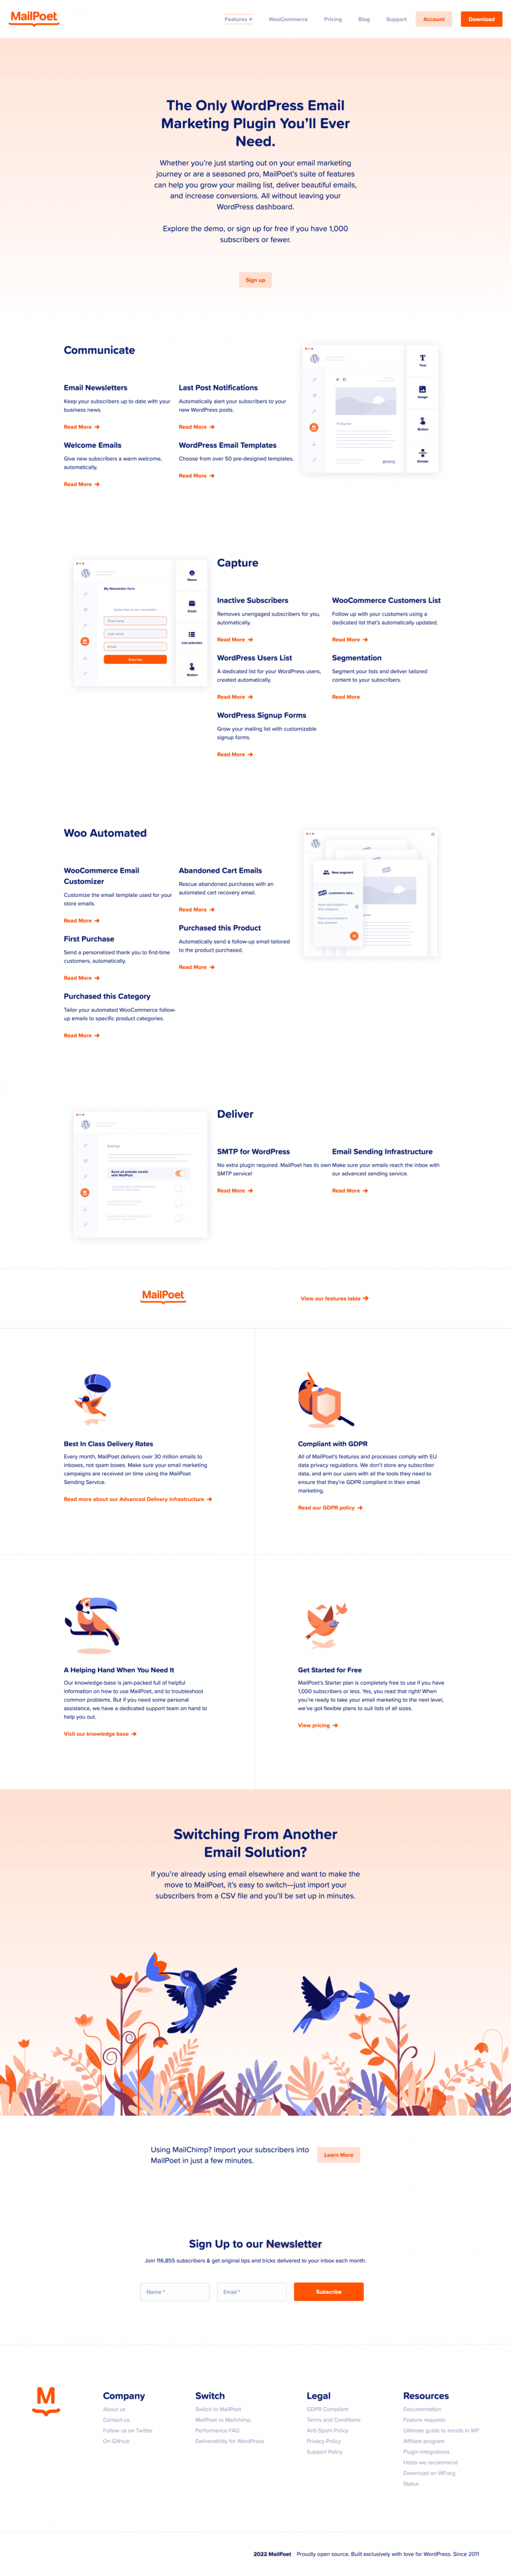 mailpoet-features-page